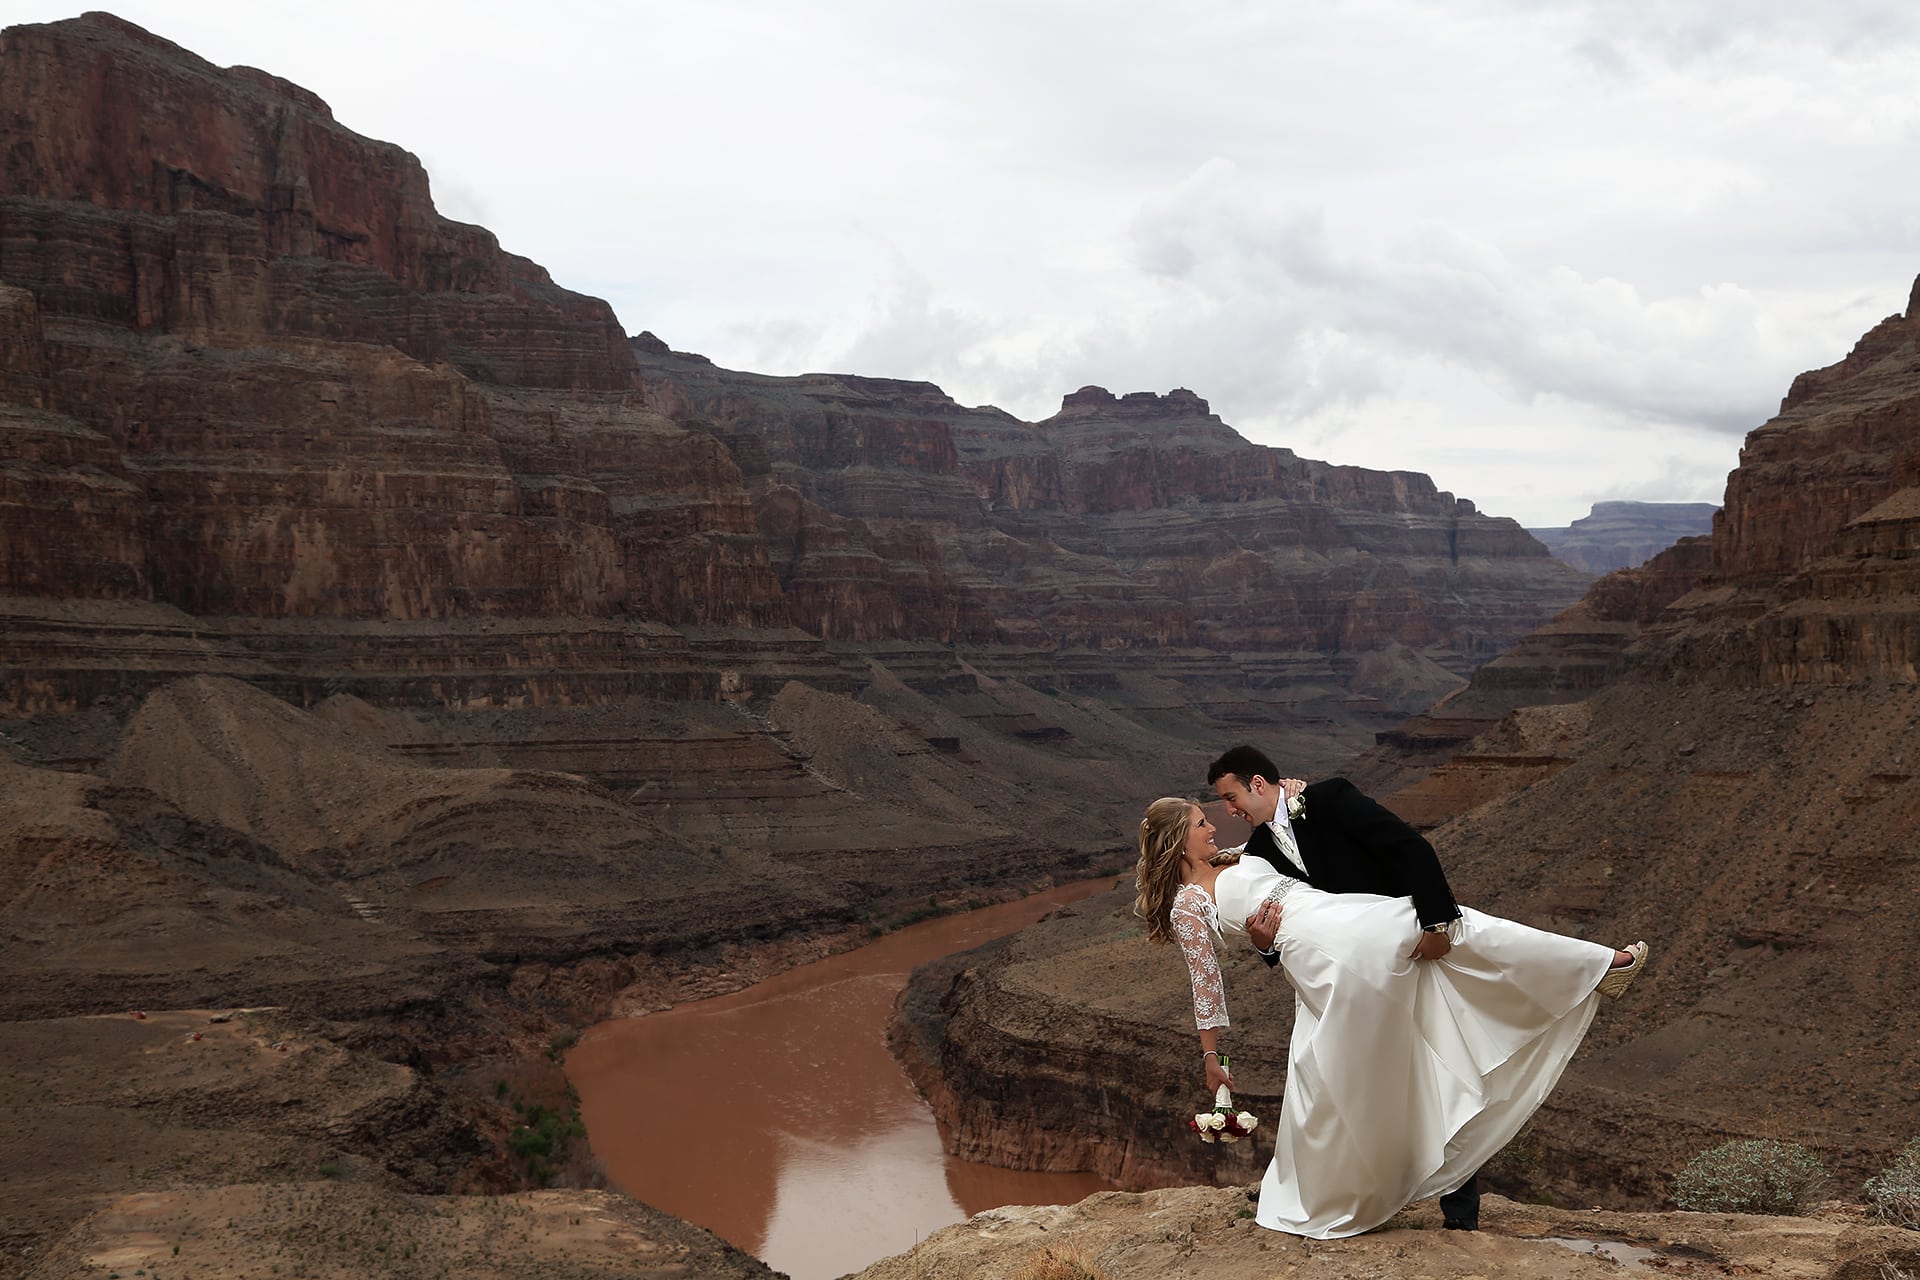 A bride and groom kissing on a cliff overlooking the grand canyon.